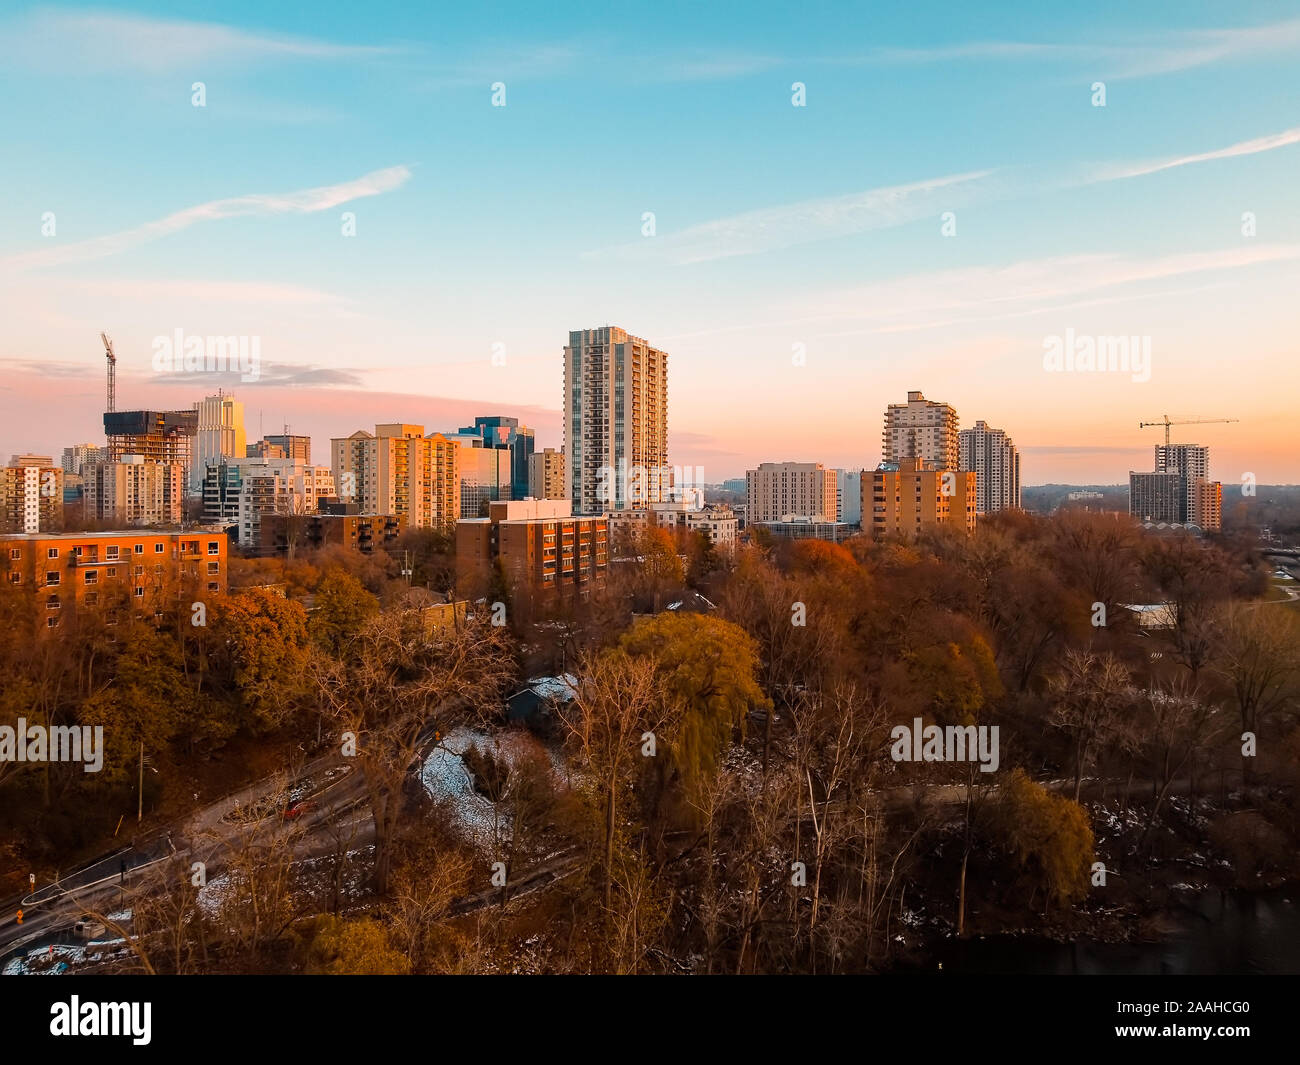 Aerial photo of the urban cityscape development and downtown skyline in London, Ontario, Canada at dusk in late Fall, November 2019. Shows the growing Stock Photo